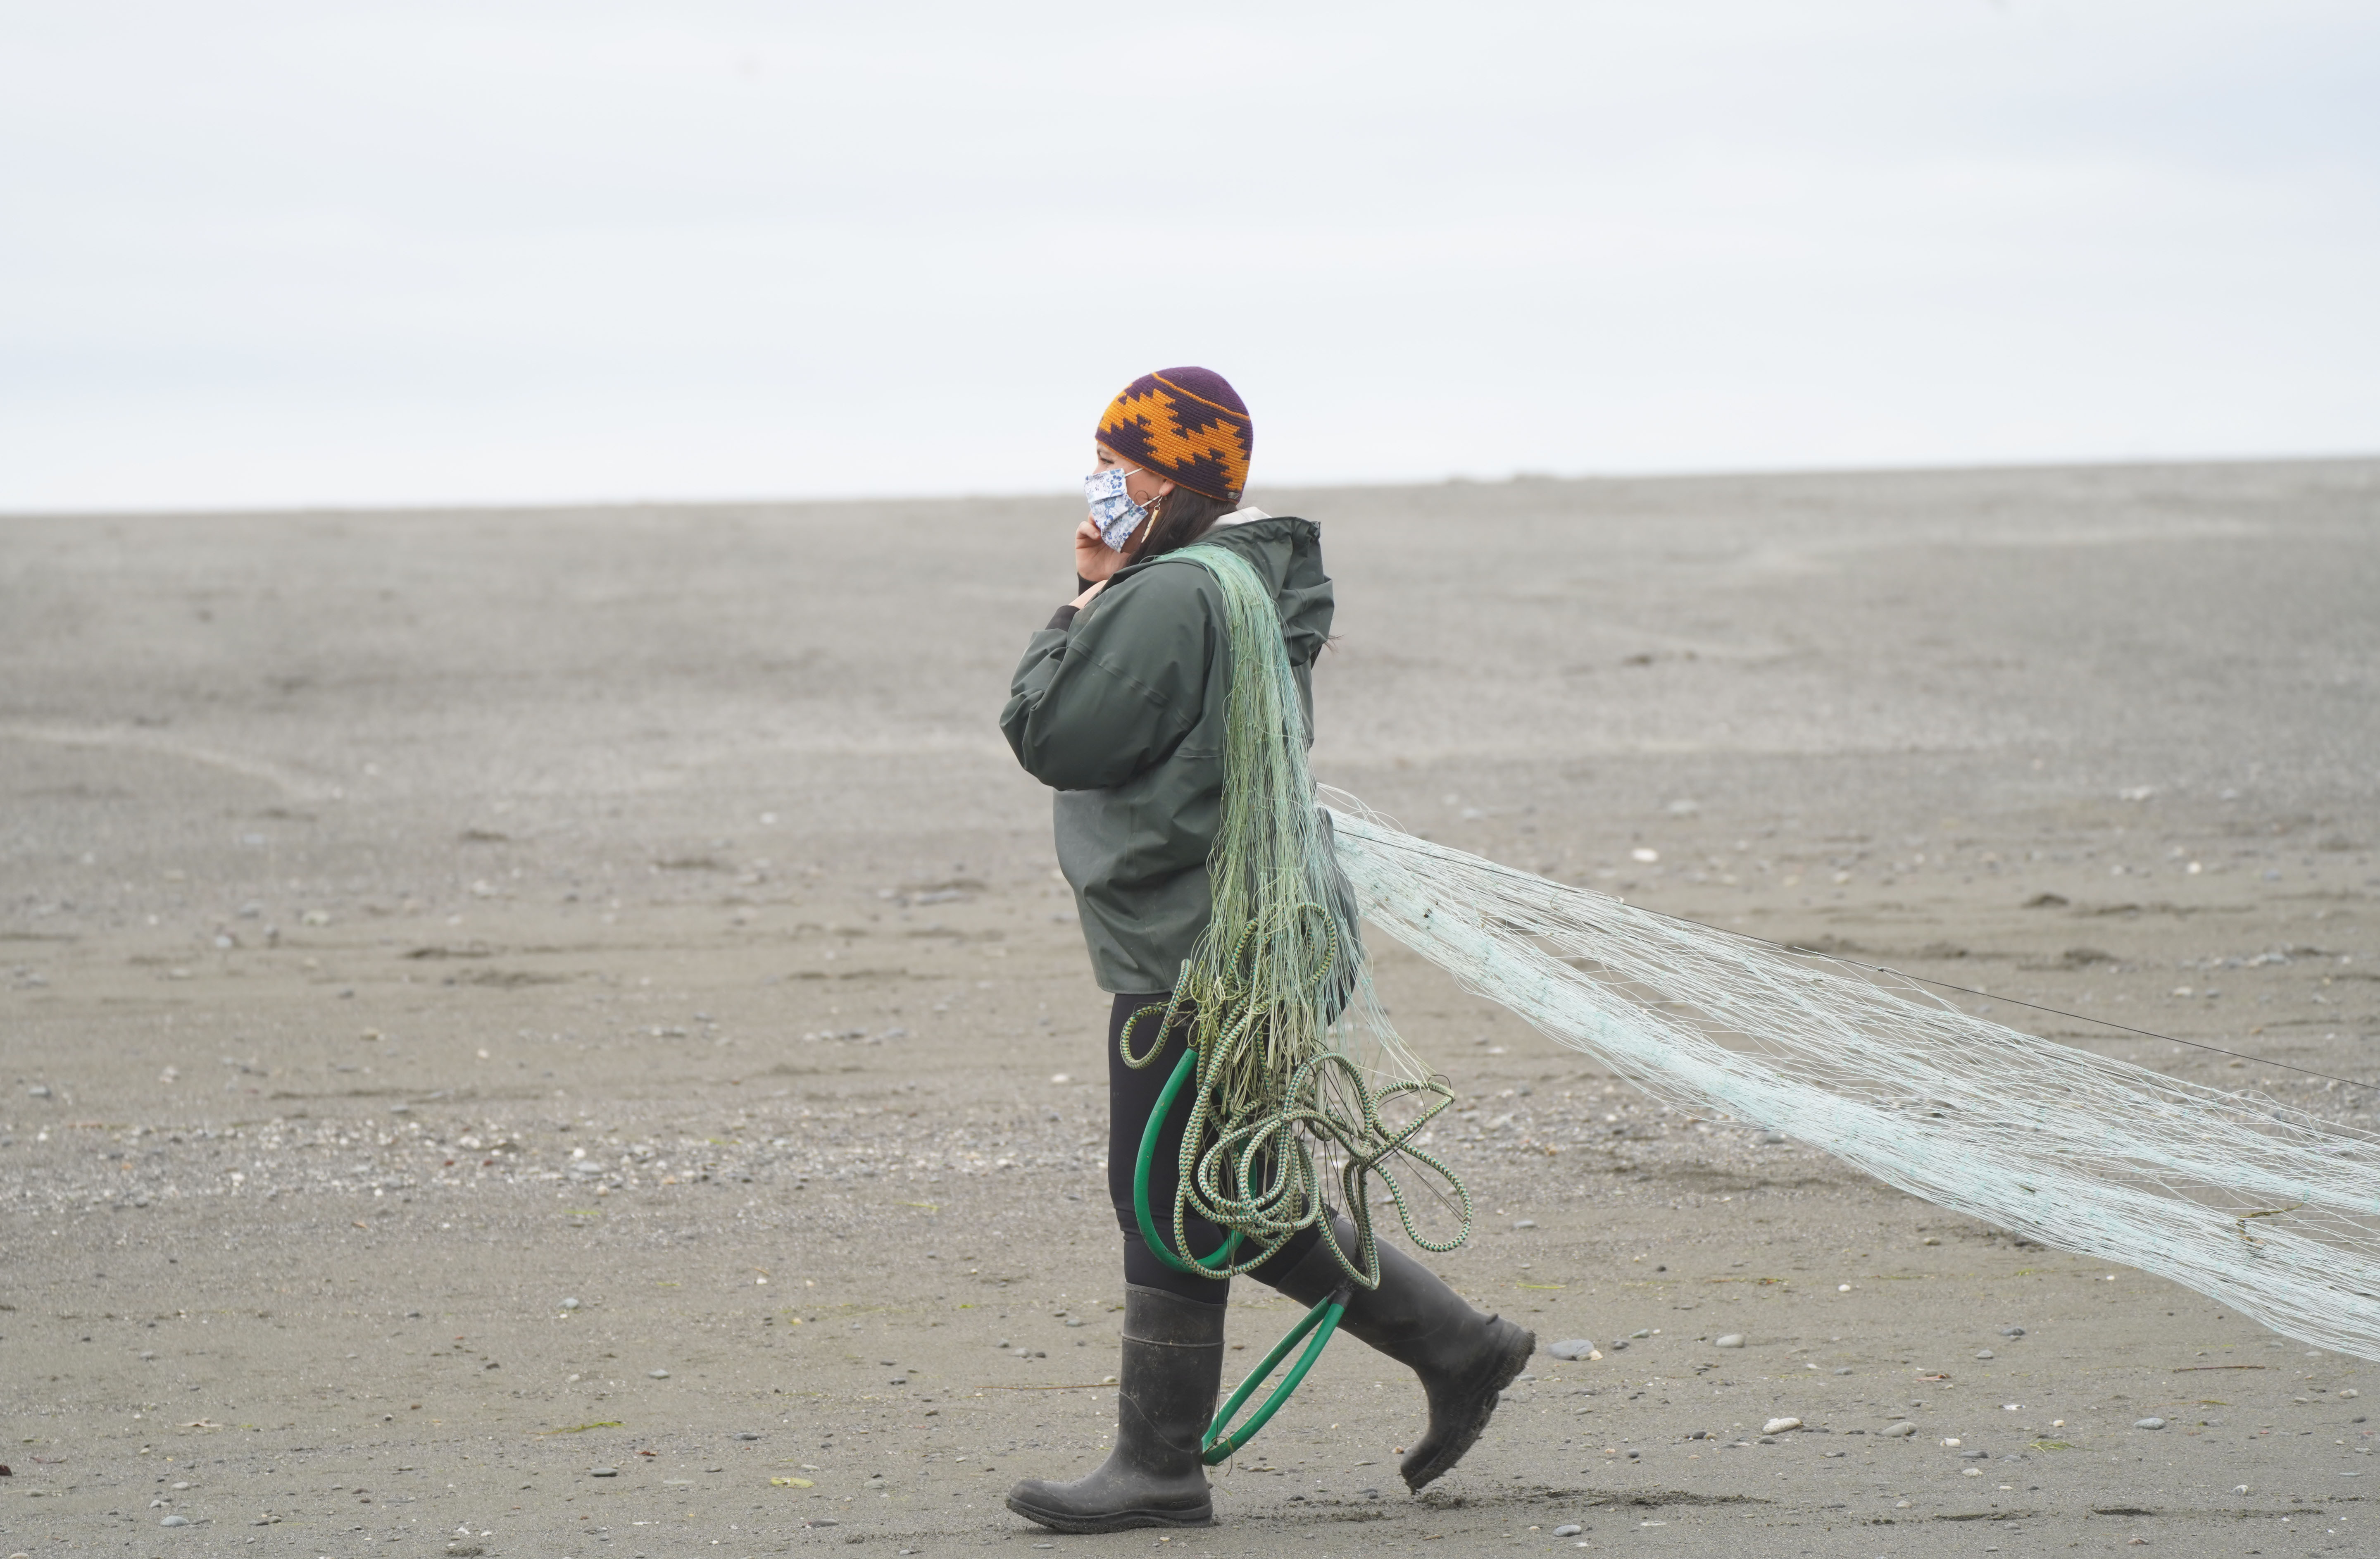 A member of the Yurok Indian Tribe uses a dip net to fish for